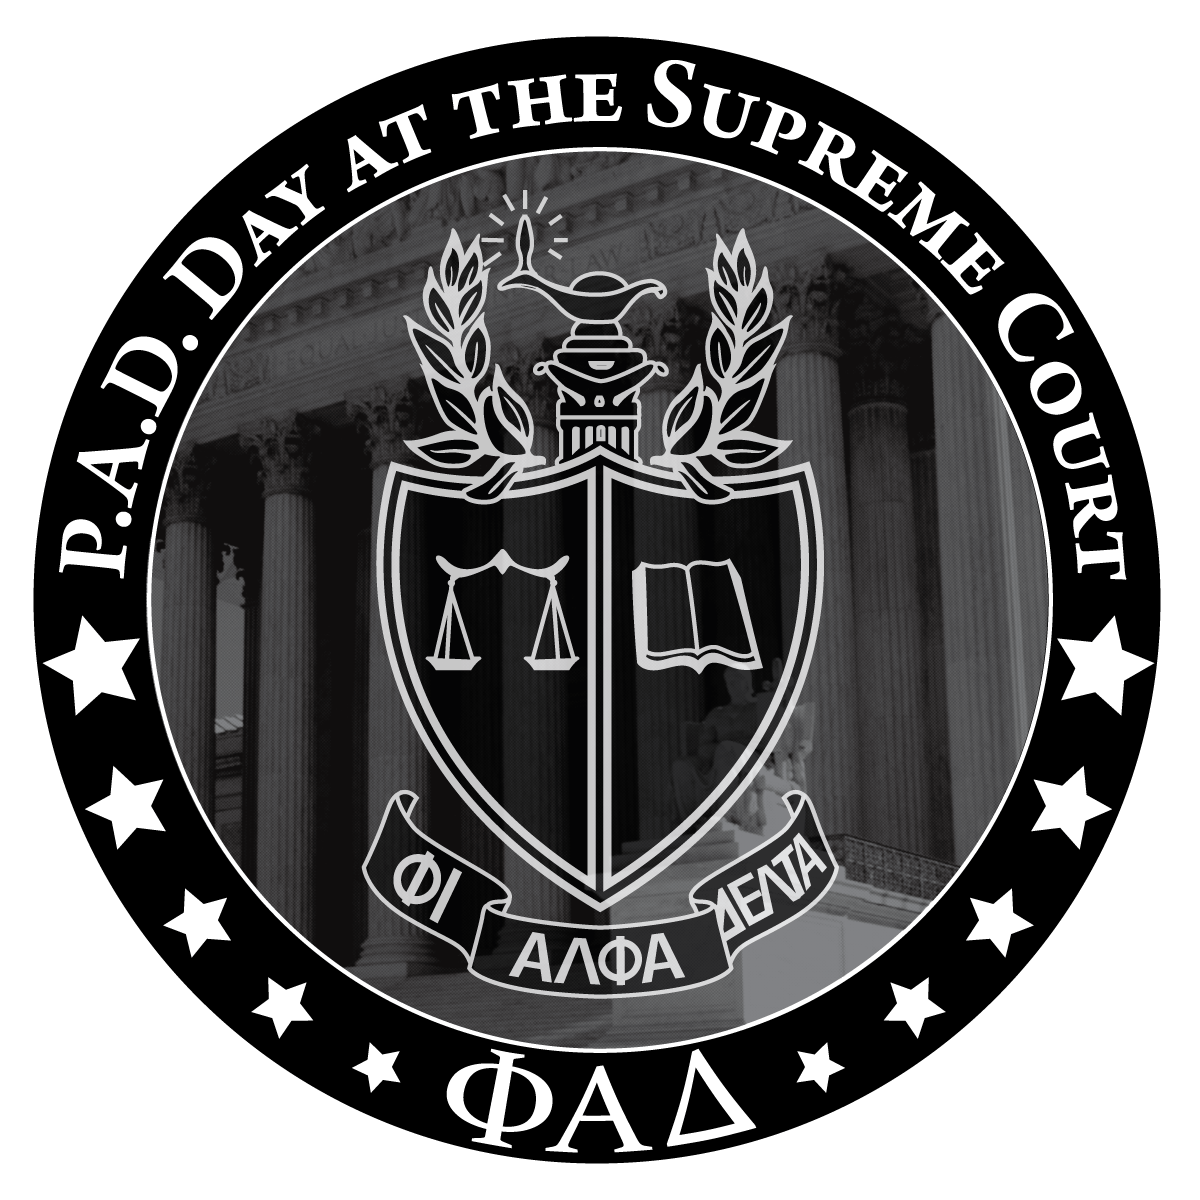 SCOTUS Logo - 52nd Annual P.A.D. Day at the Supreme Court of the United States